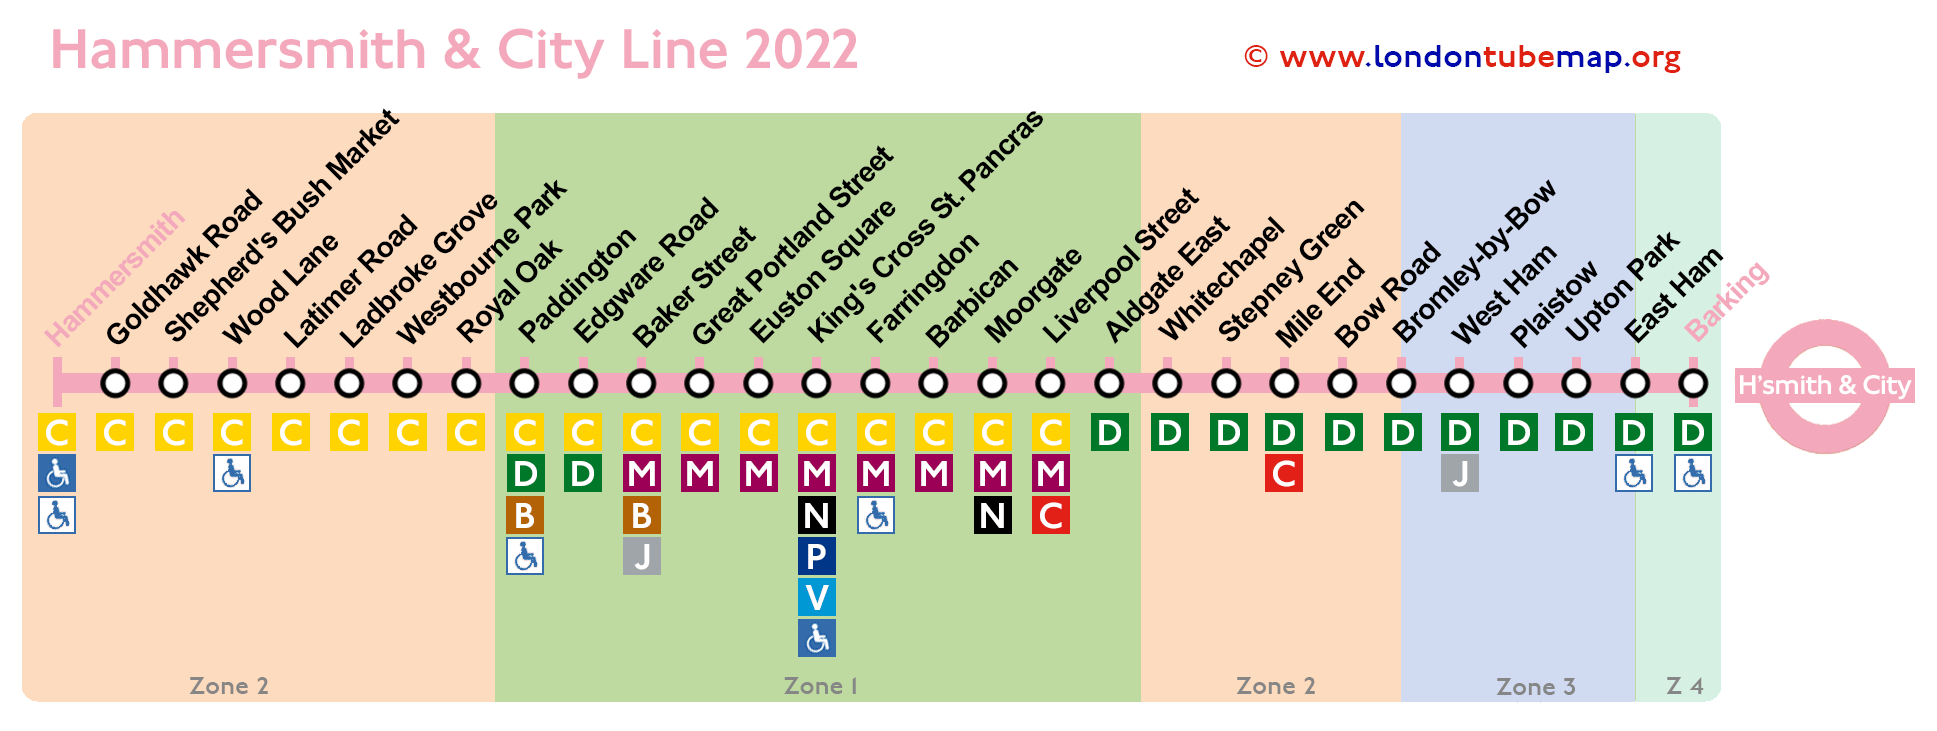 Hammersmith and City line 2022